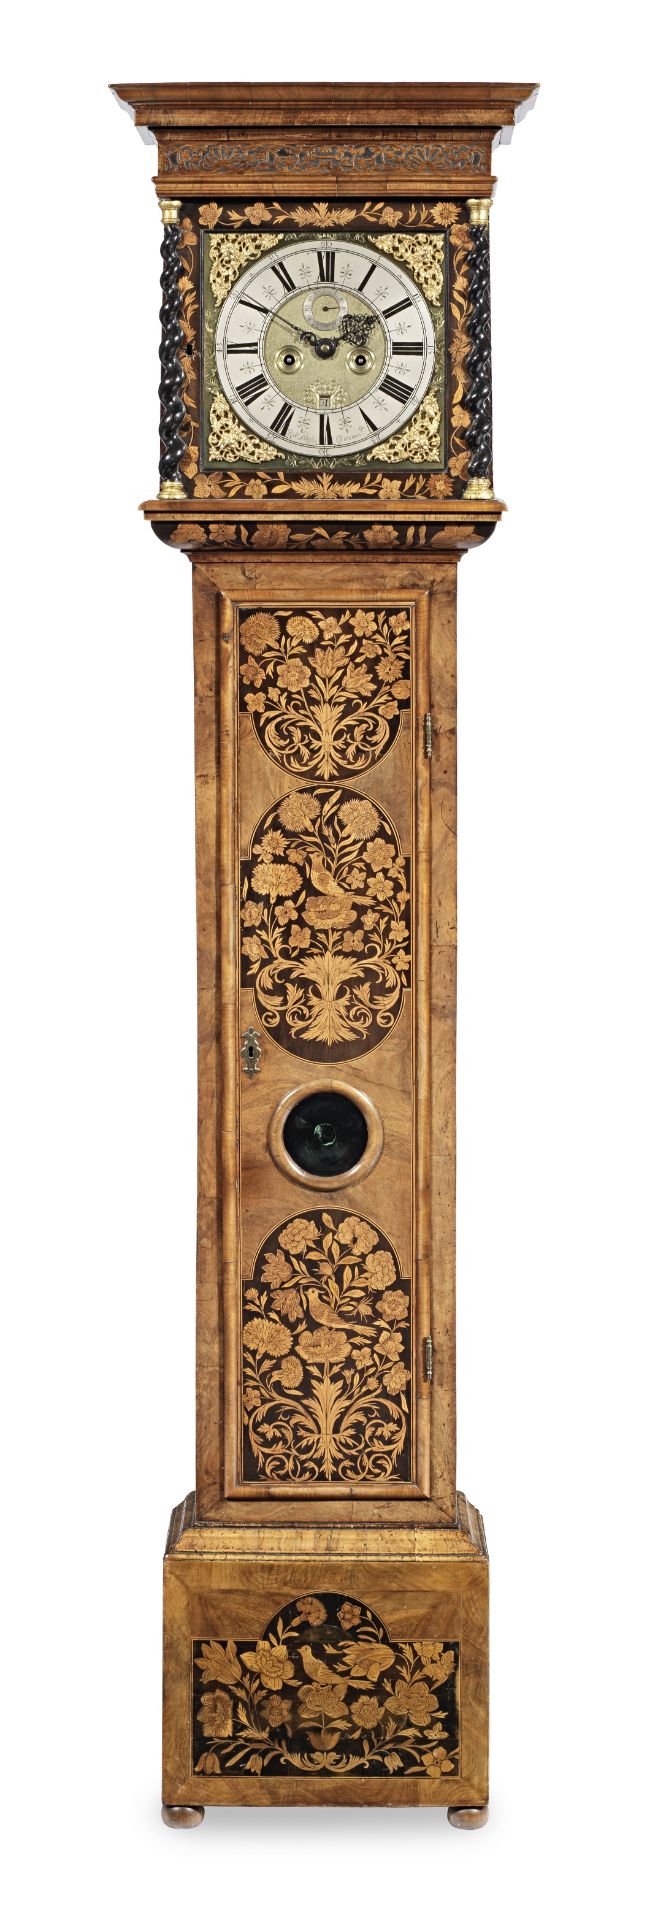 A late 17th century walnut marquetry longcase clock by a Tompion apprentice Robert Pattison, Gree...